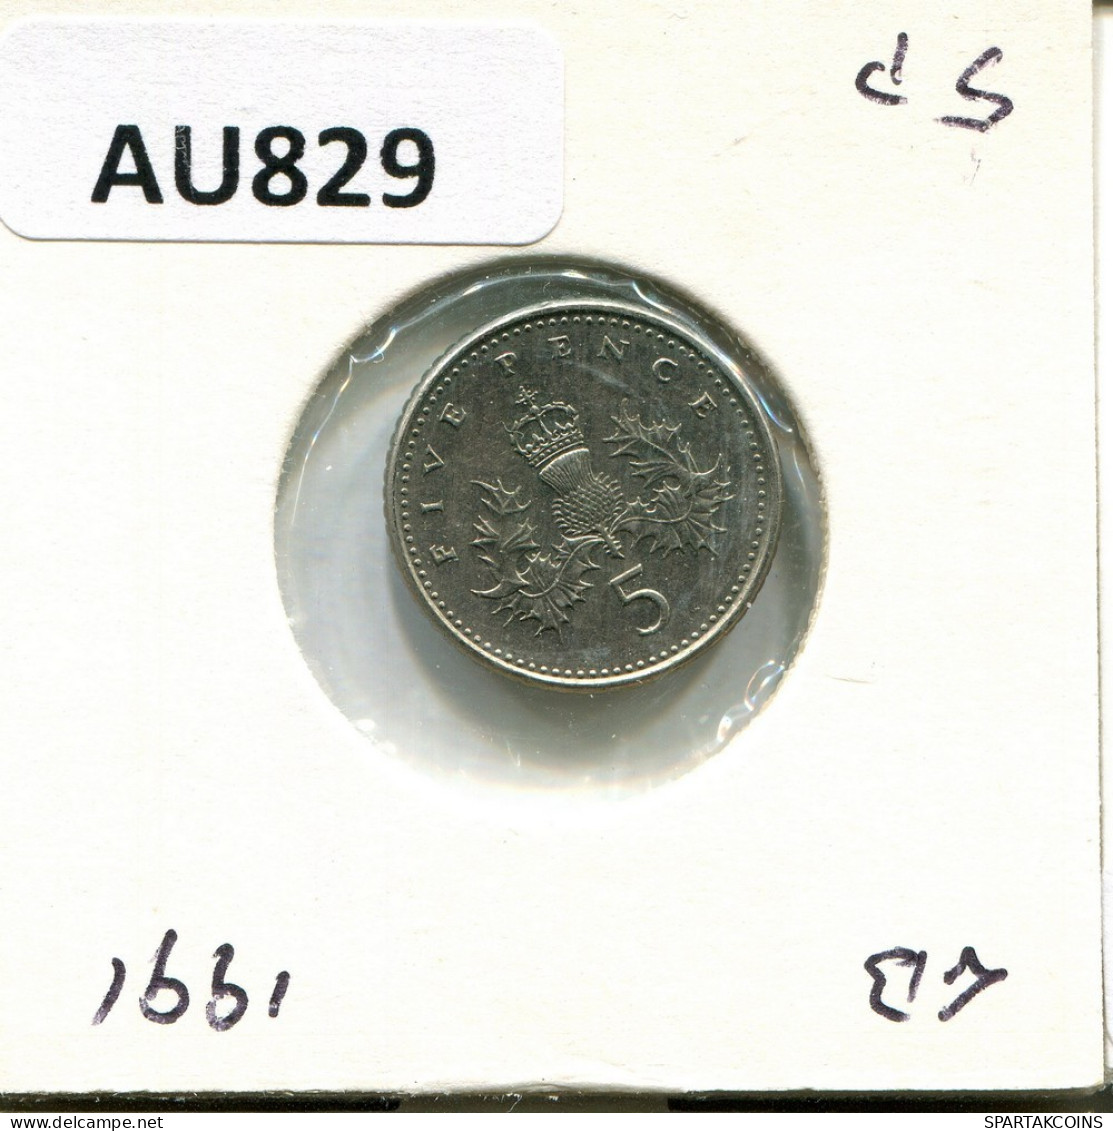 5 PENCE 1991 UK GREAT BRITAIN Coin #AU829.U.A - 5 Pence & 5 New Pence